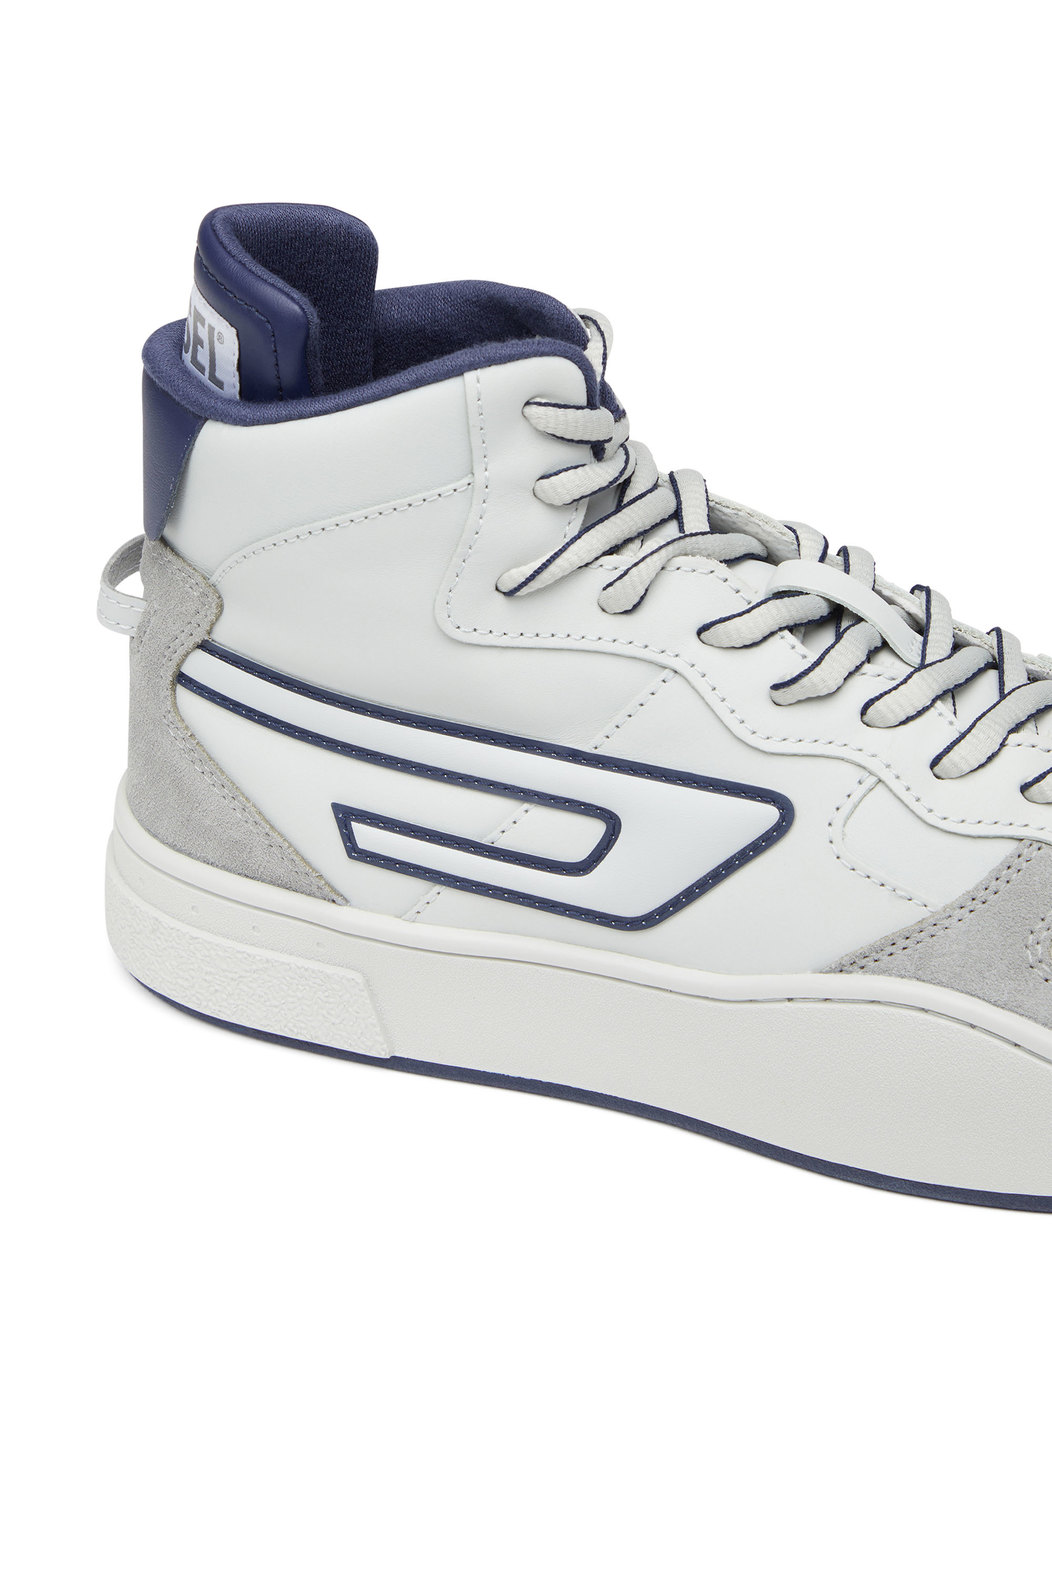 High-top sneakers in leather and suede | Diesel